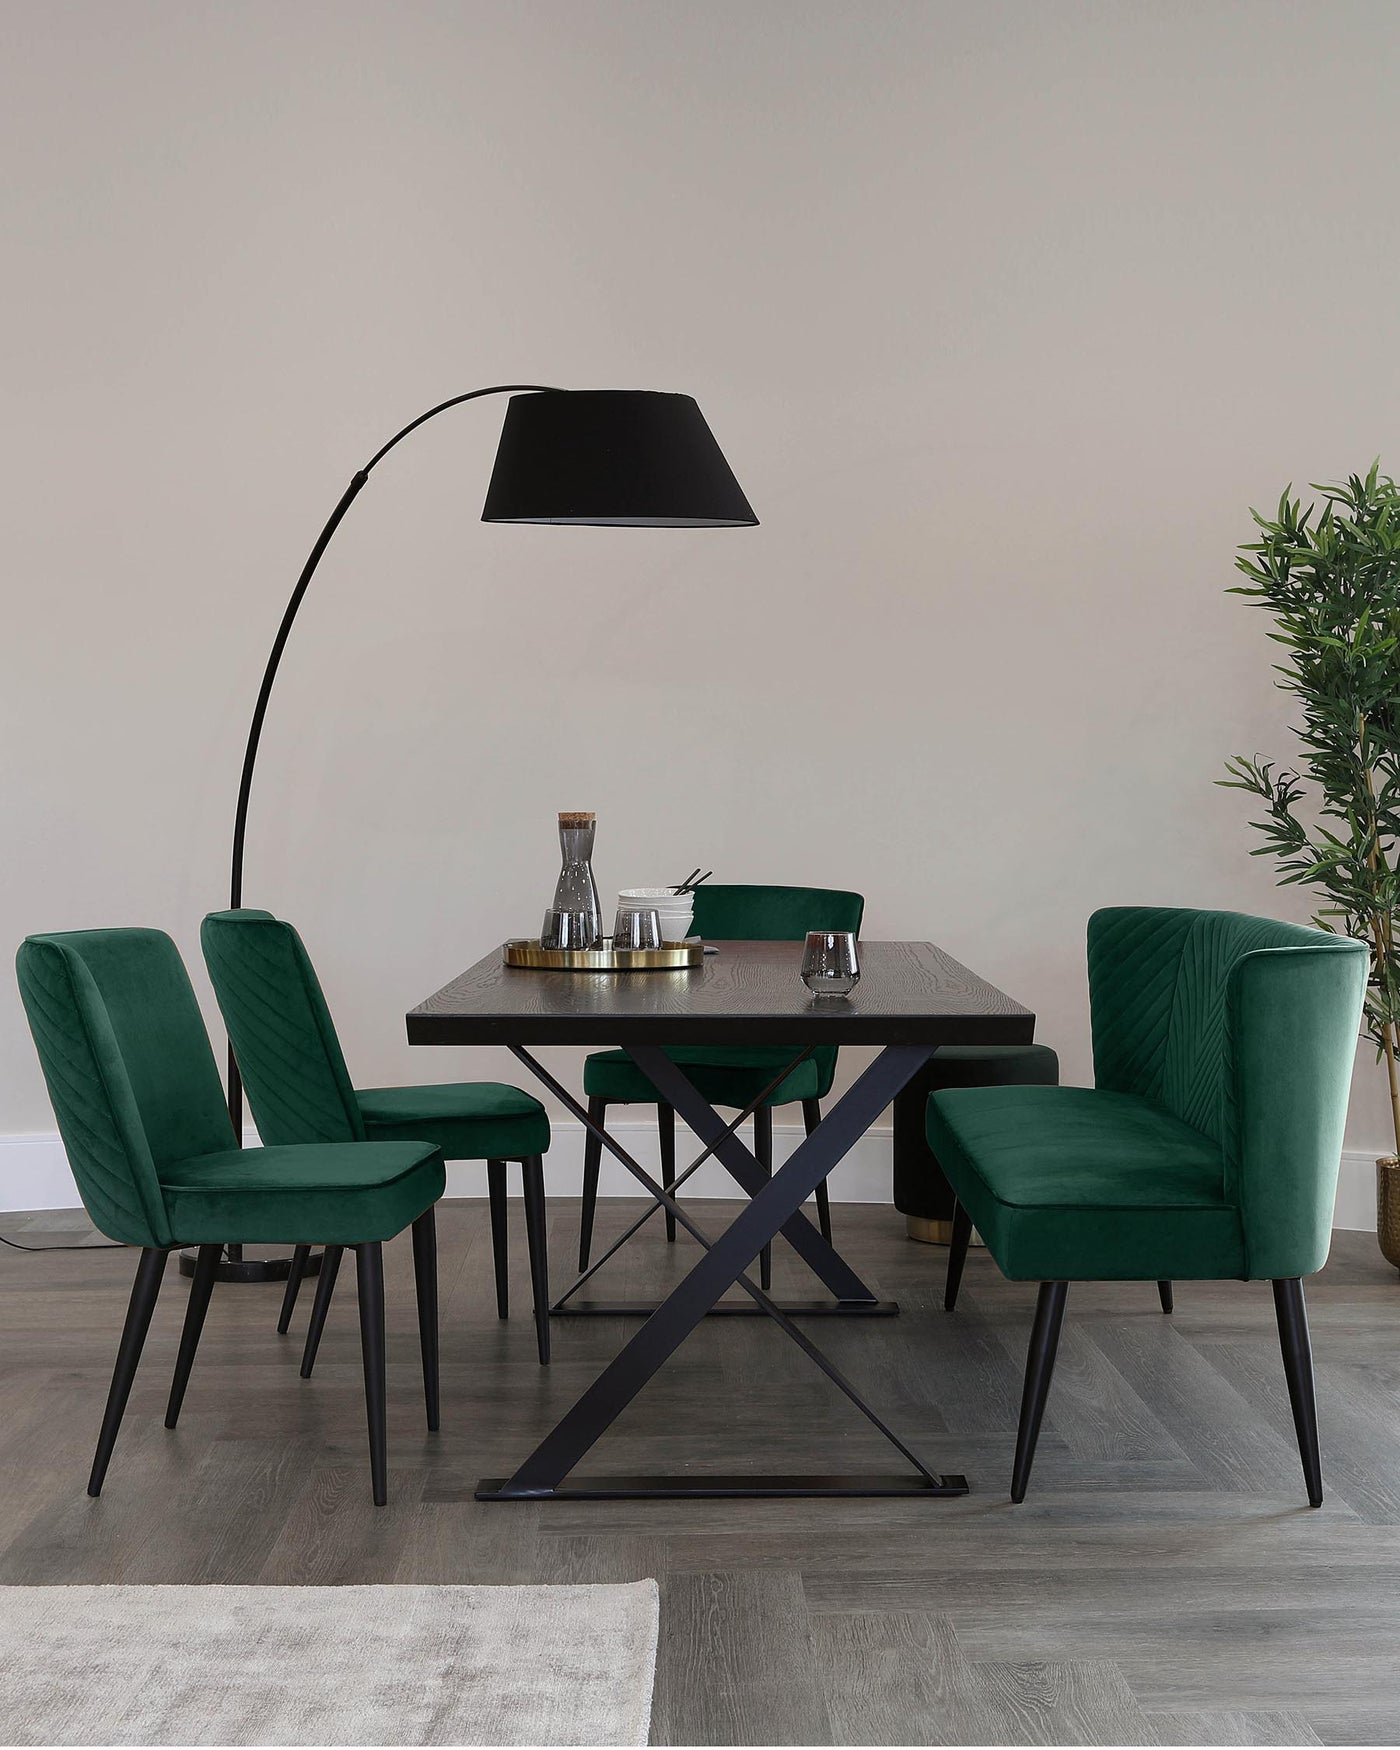 Modern dining room furniture set featuring a dark wood table with a unique X-shaped black metal base and four plush green velvet chairs with vertical stitch detailing and black metal legs. An arched floor lamp with a large black shade extends over the table, creating a contemporary atmosphere.